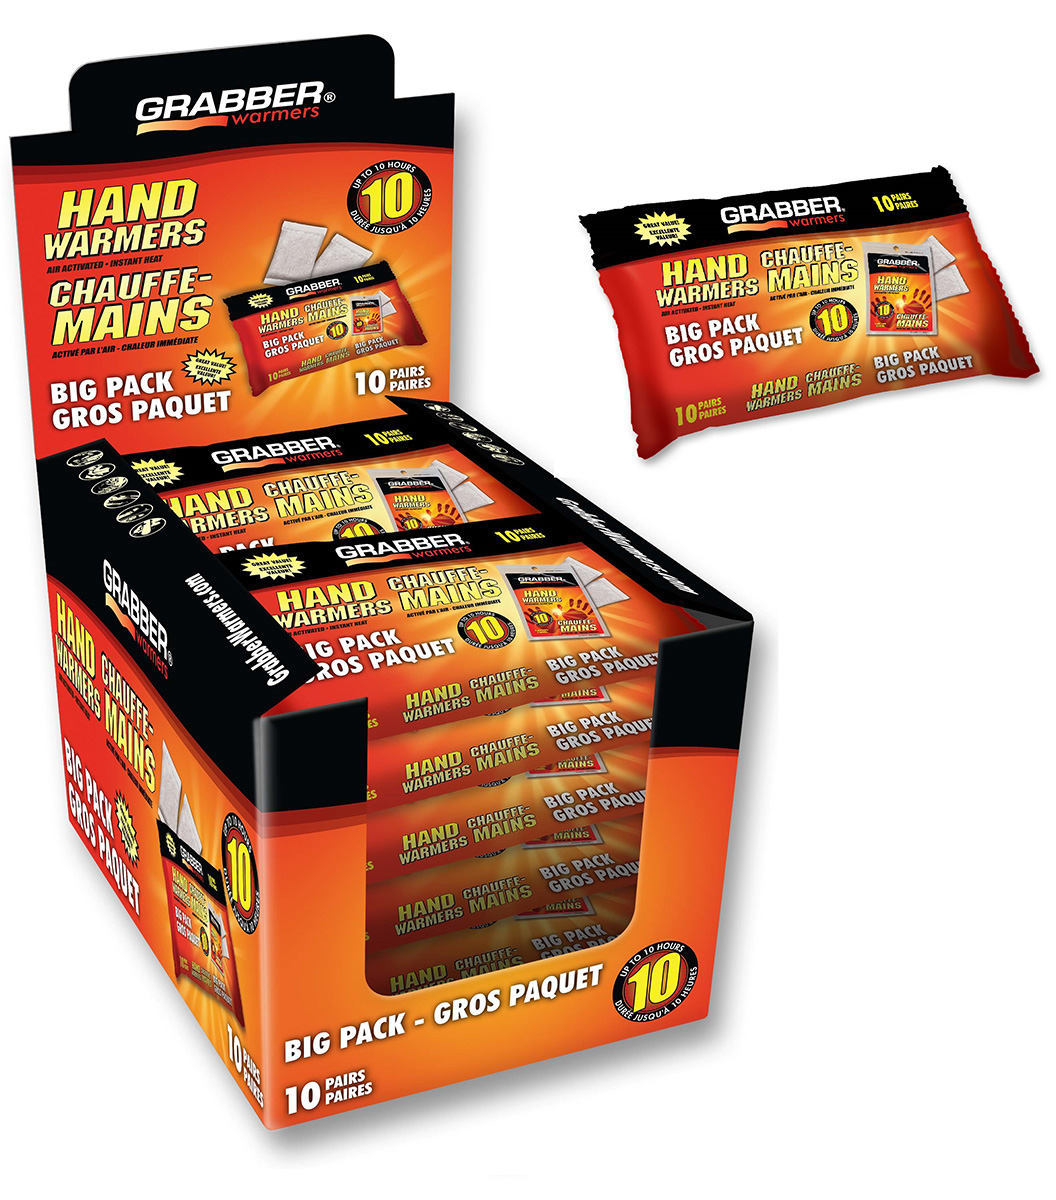 Image Grabber hand warmers, pack of 10